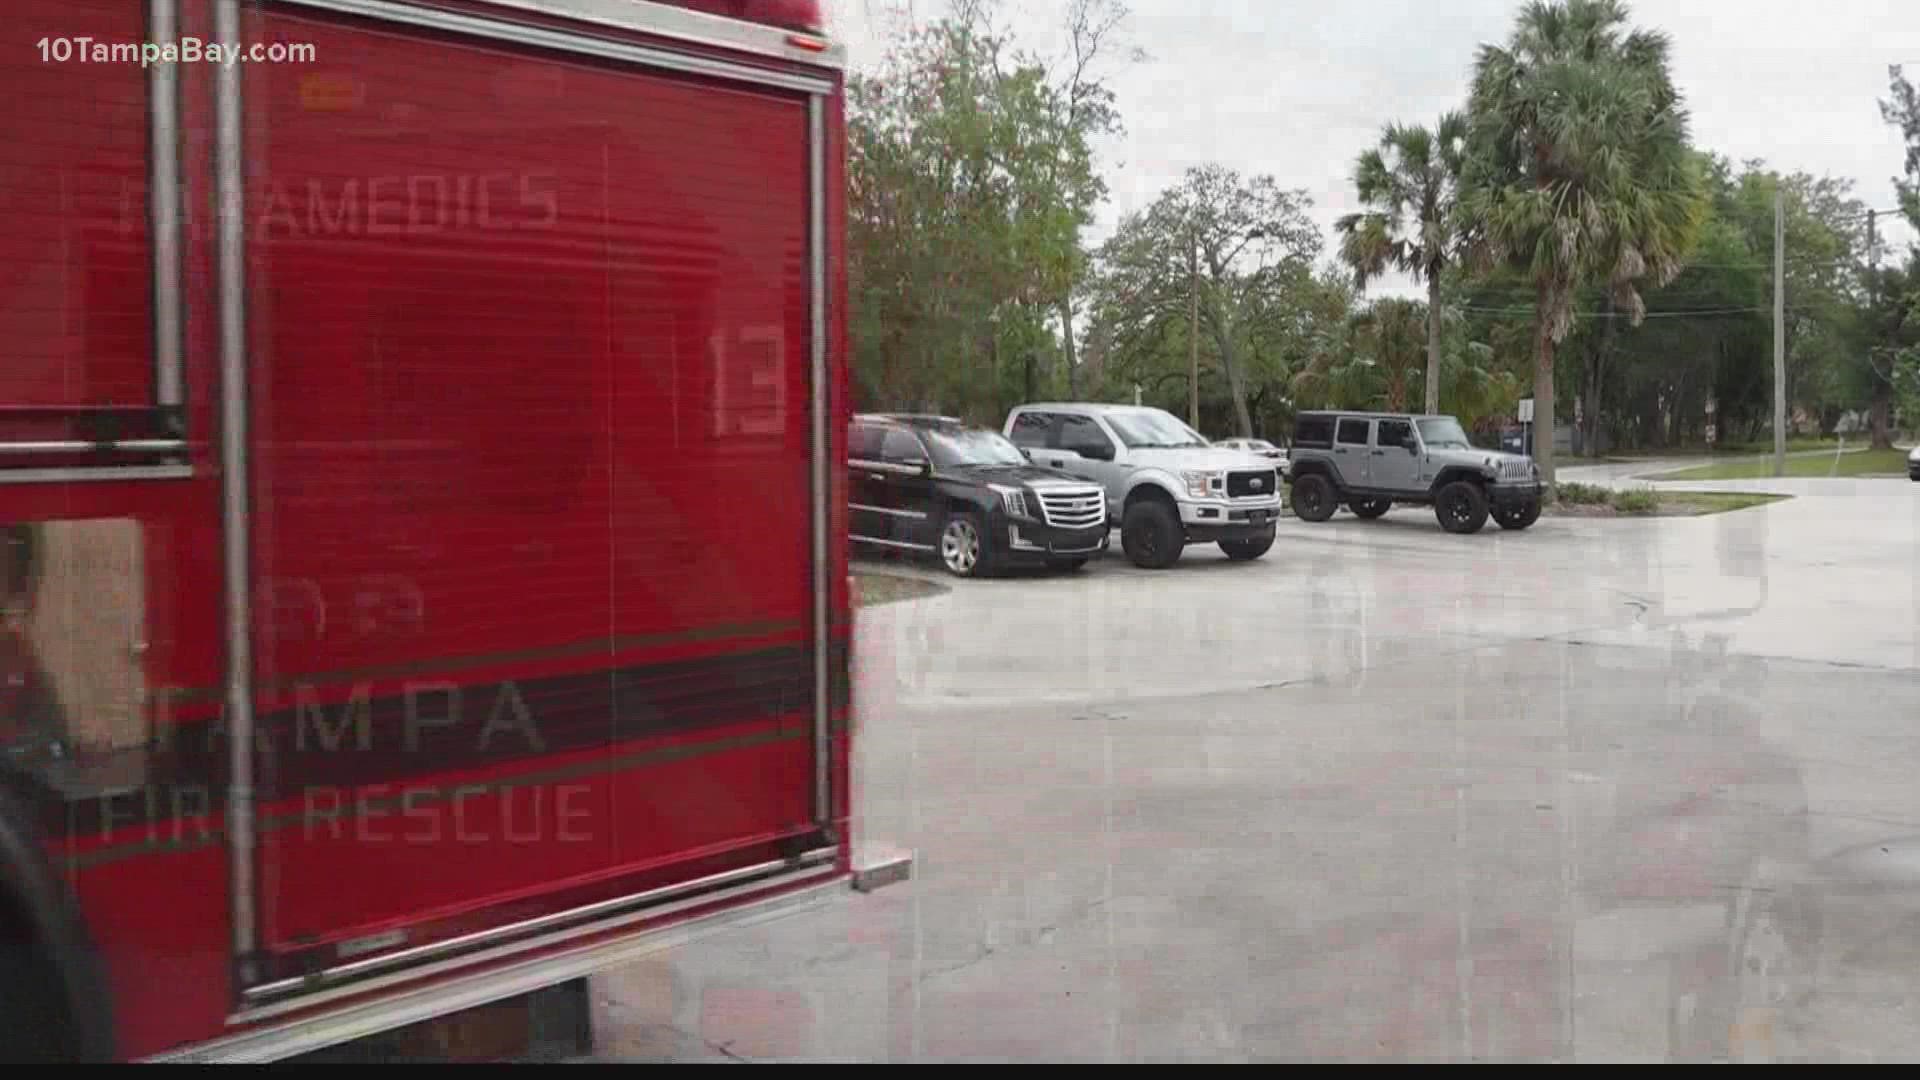 The city of Tampa is about to put its money where its mouth is when it comes to improving fire rescue conditions, especially in New and North Tampa.